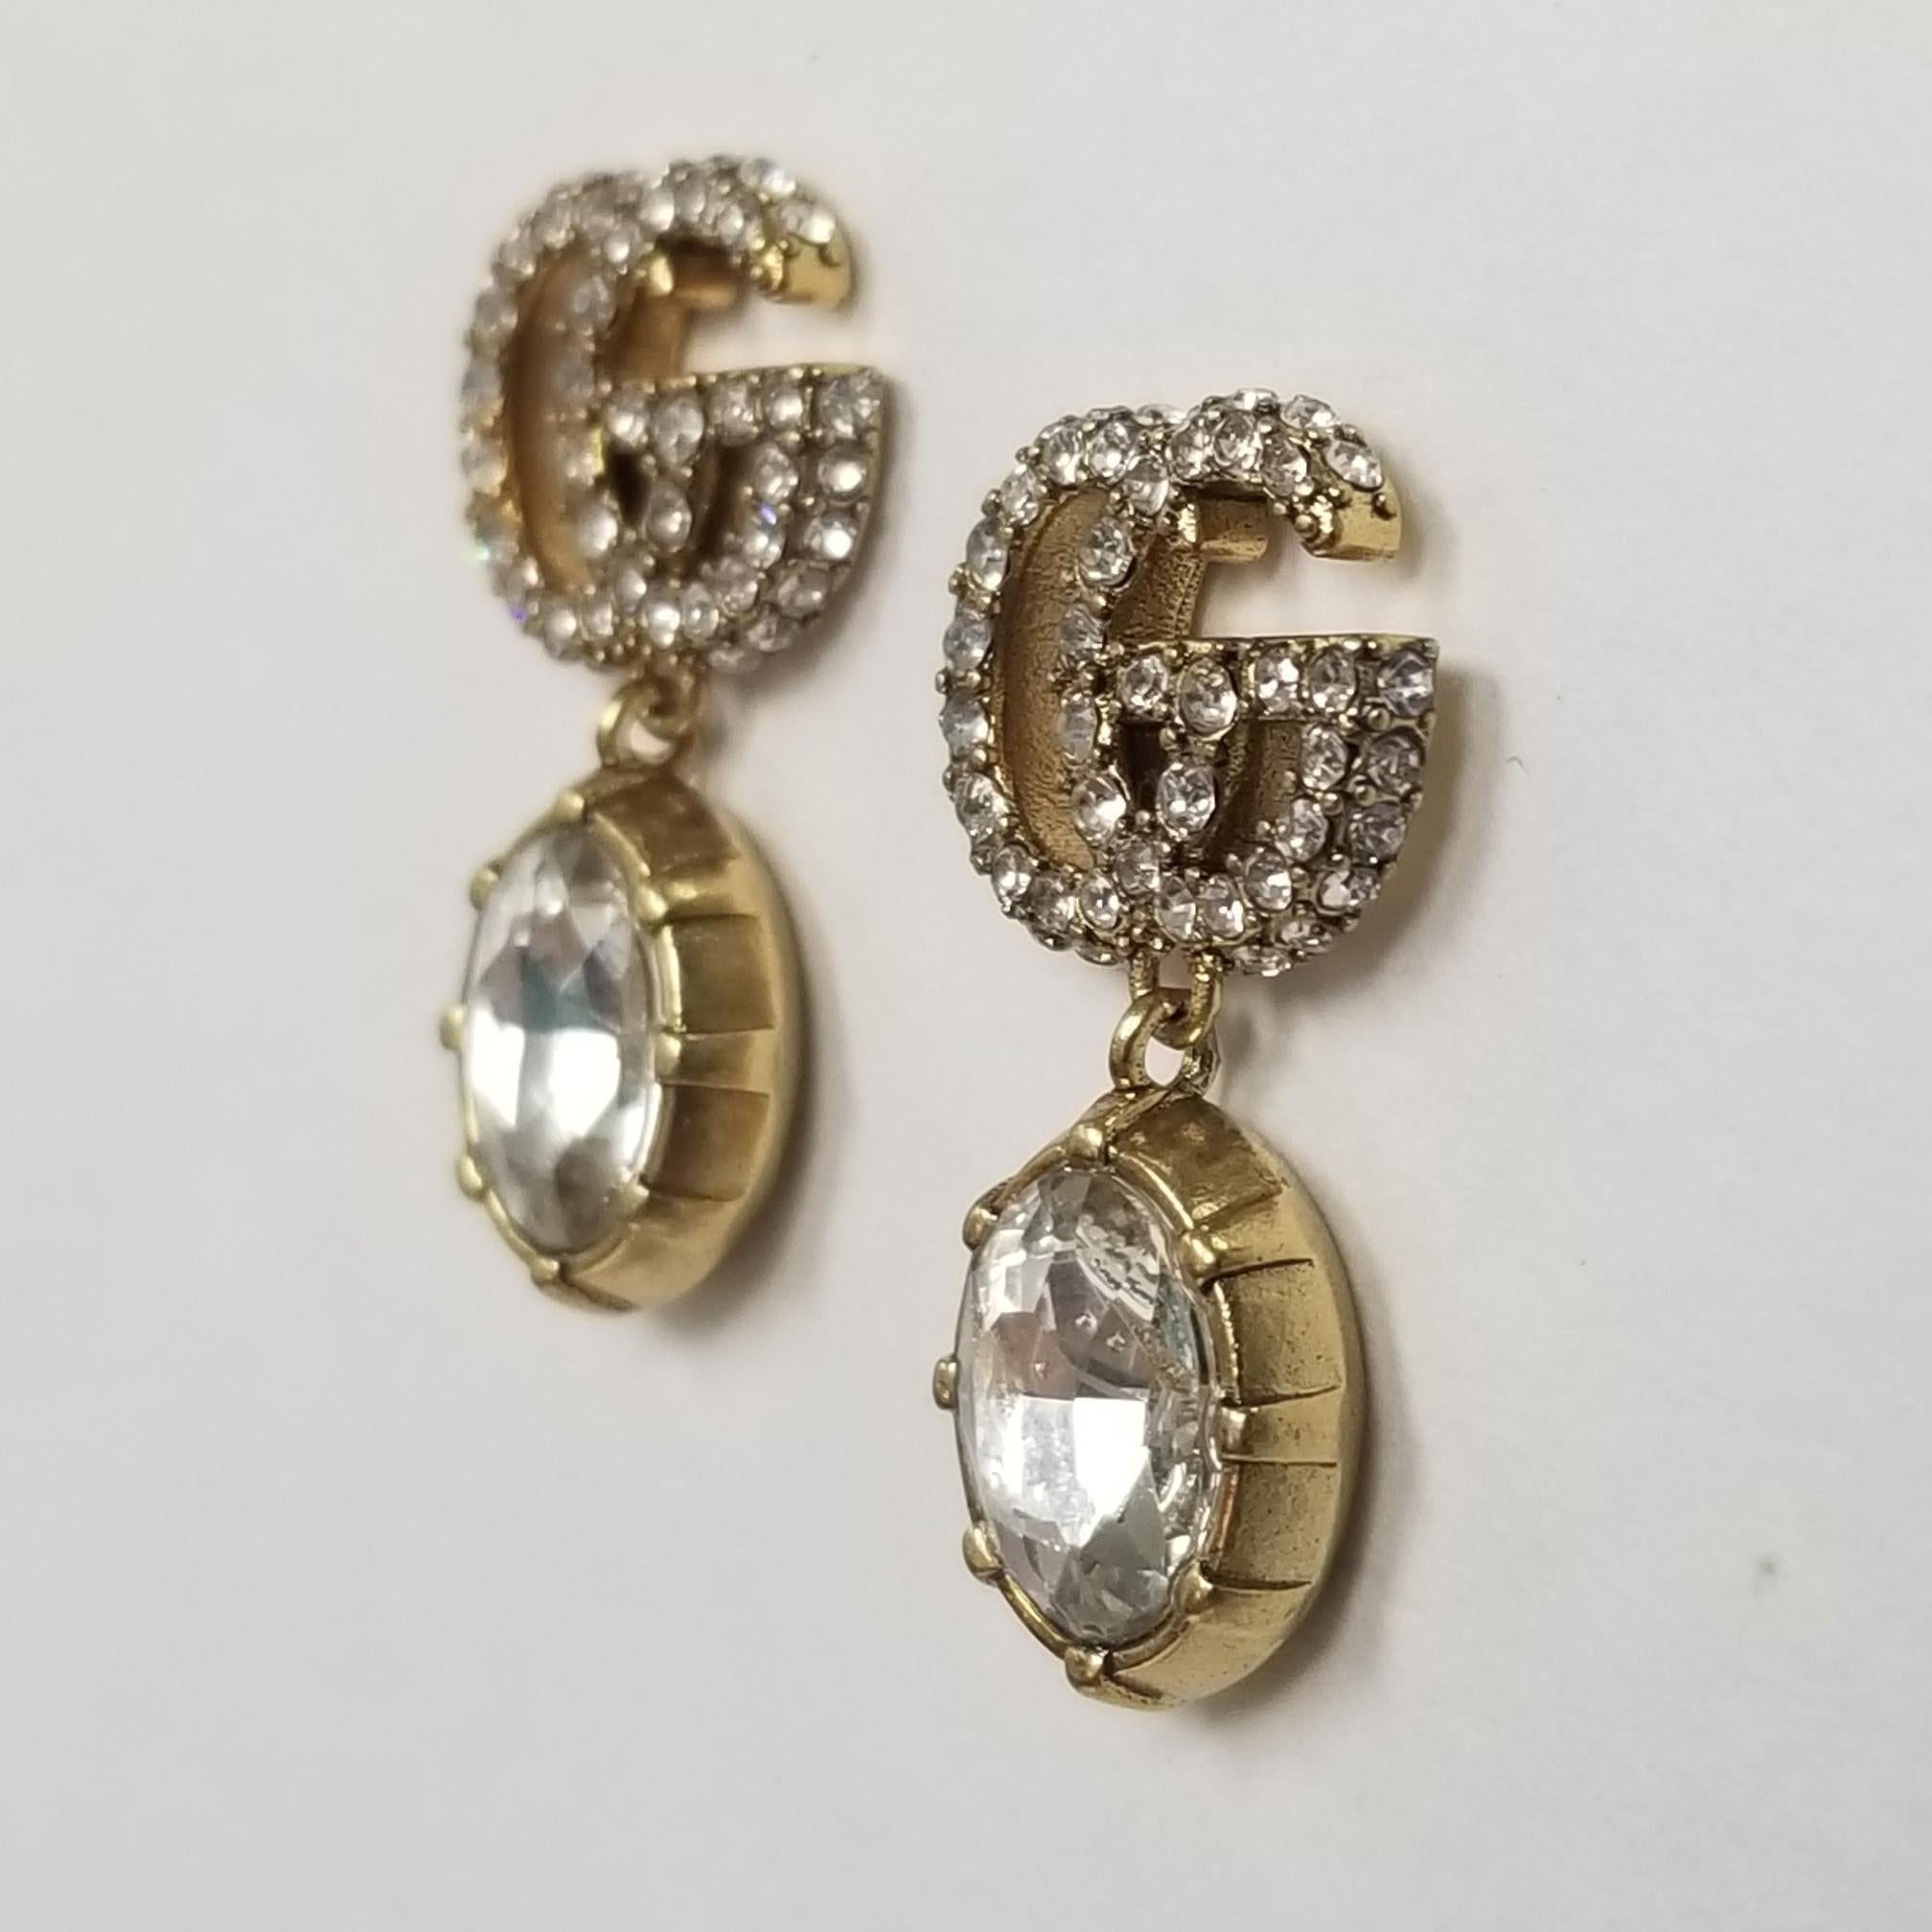  A white faceted crystal Earrings combines with the crystal Double G detail, forming a sparkling pendant that completes these earrings in aged gold-toned metal.

    Metal with aged gold finish
    Crystal encrusted Double G detail
    White crystal